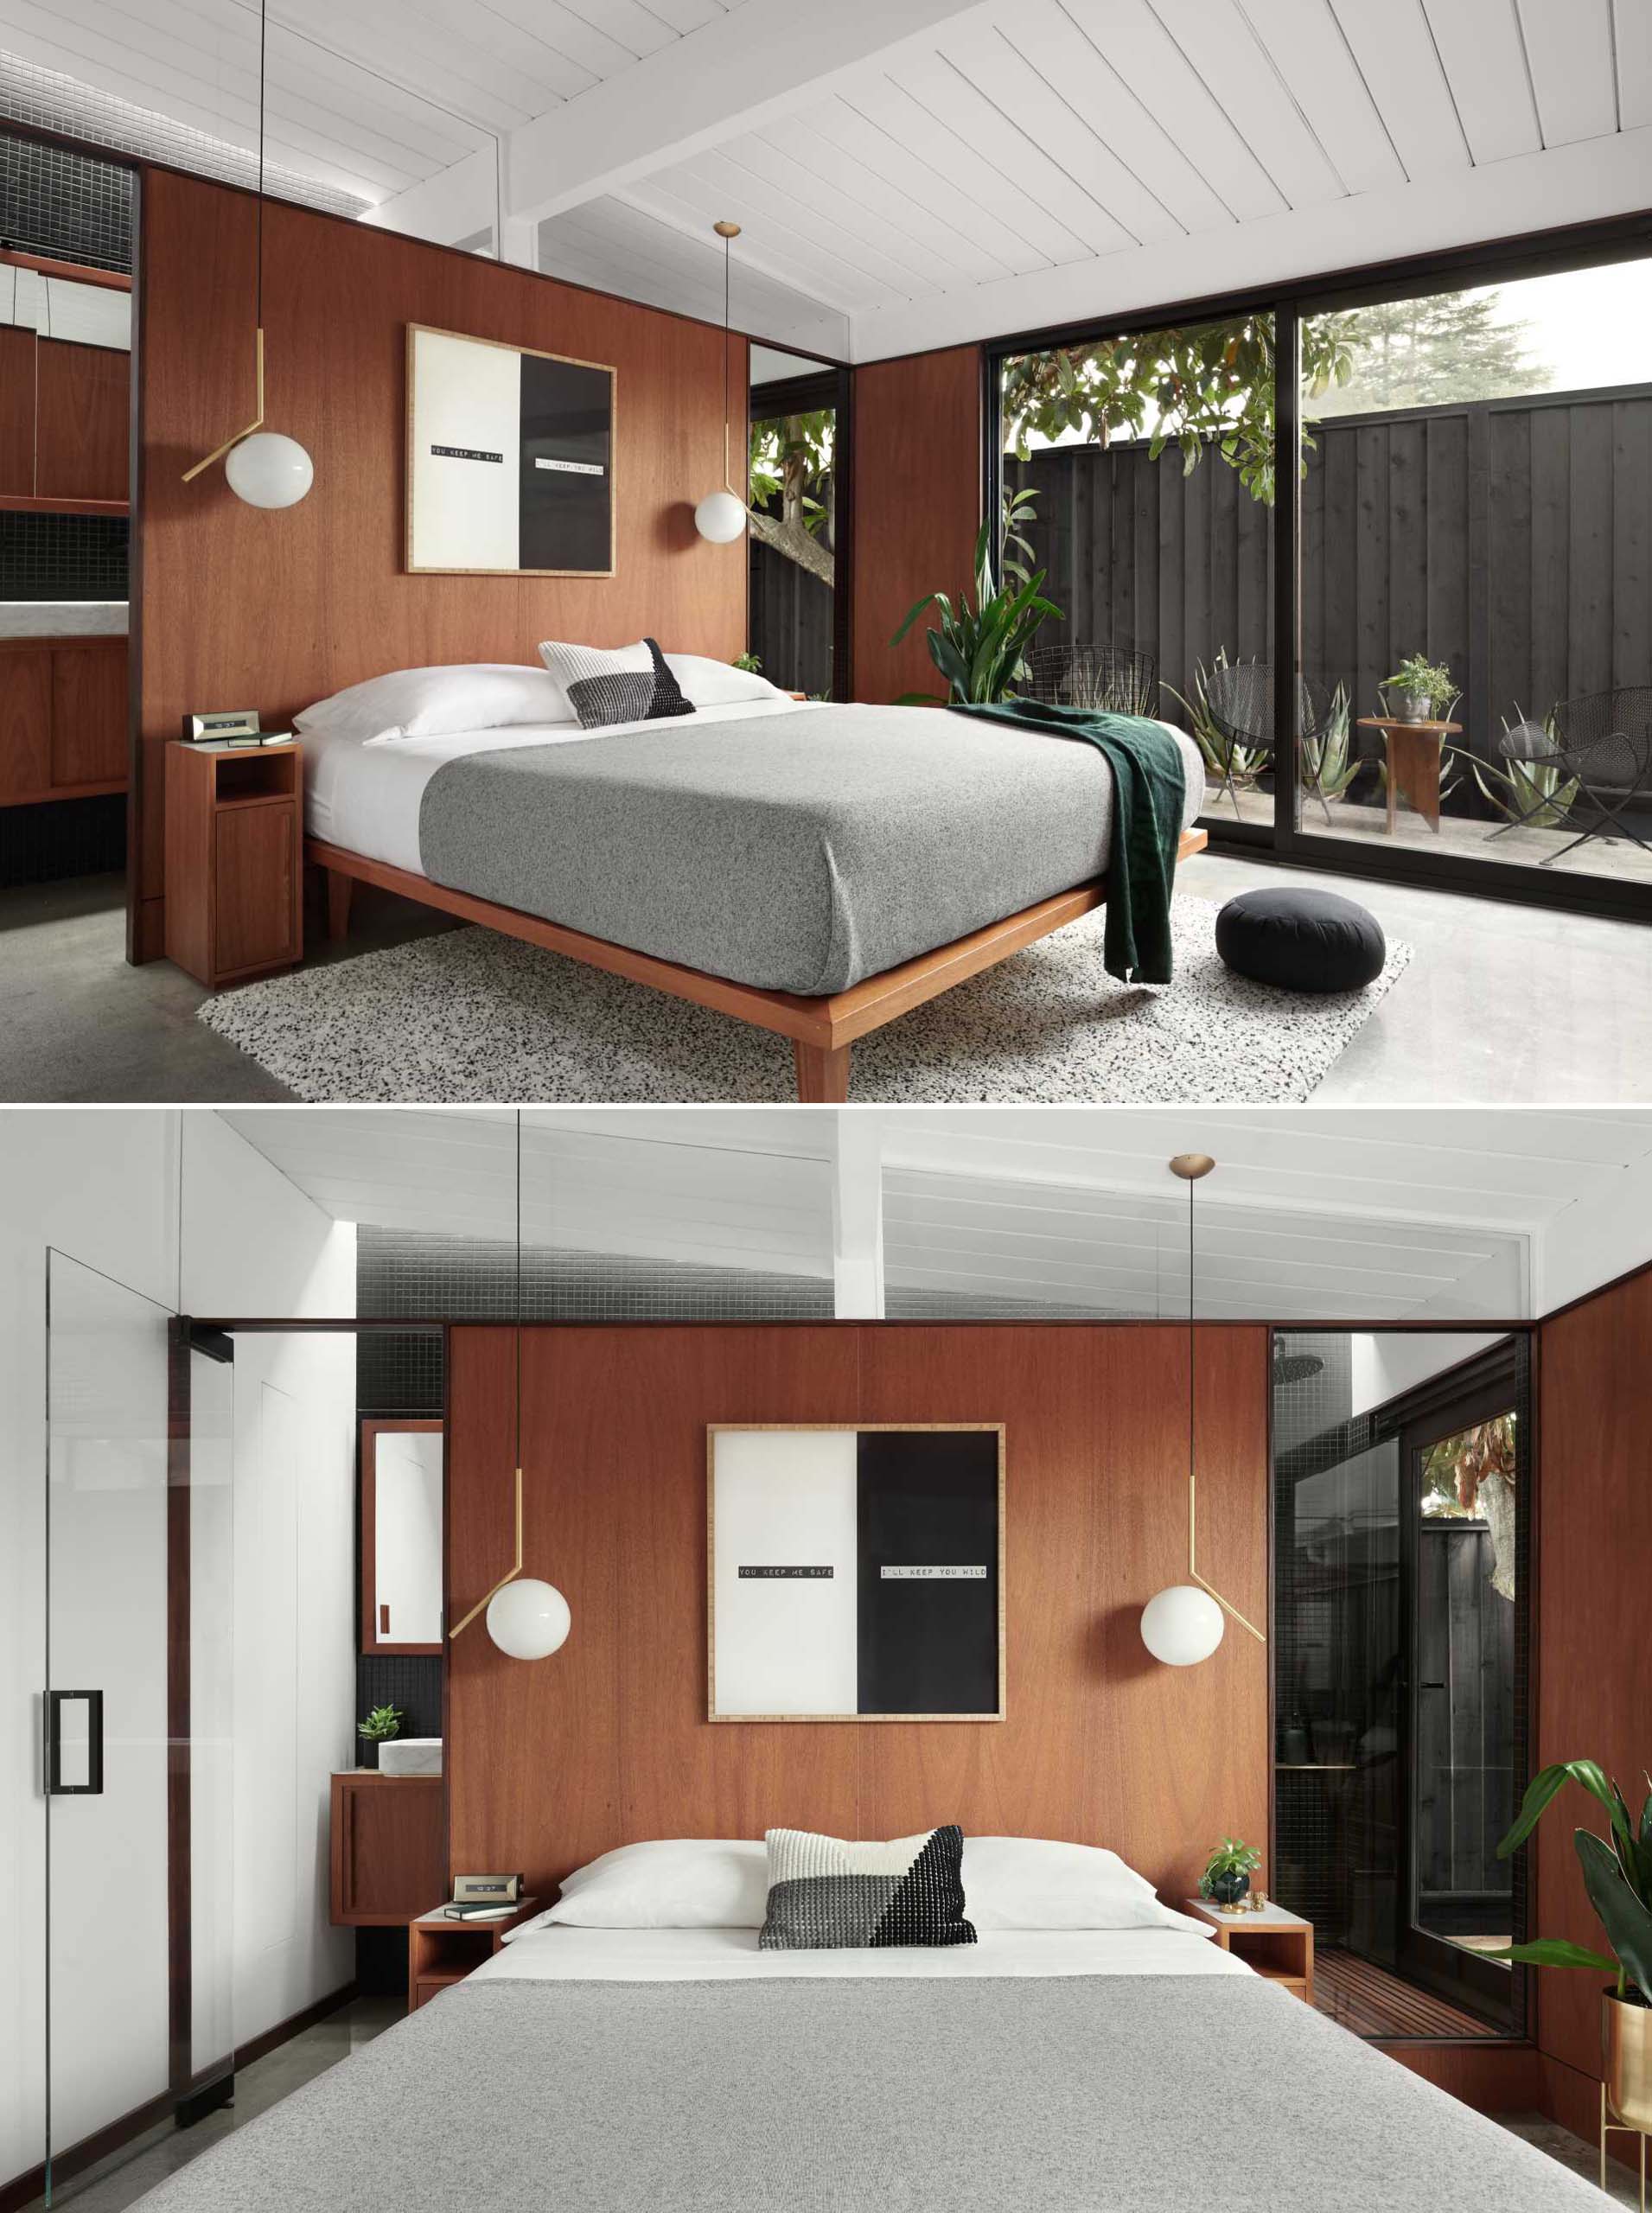 A modern mid-century modern inspired bedroom with a narrow ensuite bathroom.